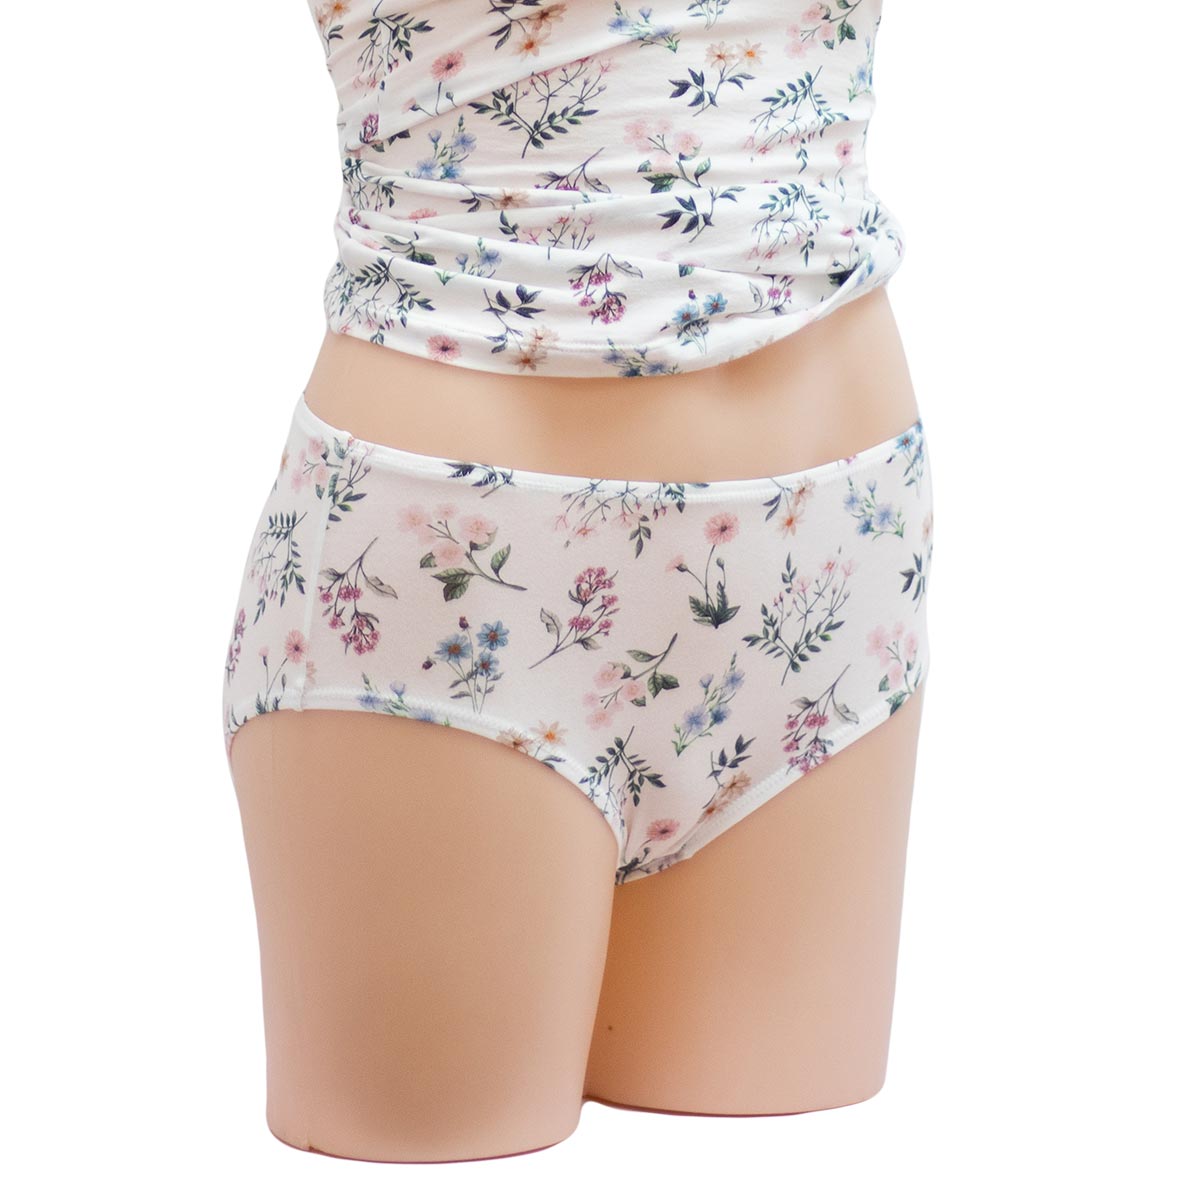 Love & Lustre Anneliese Full Brief LL856 - Briefs Liberty Print / 8 / XS  Available at Illusions Lingerie